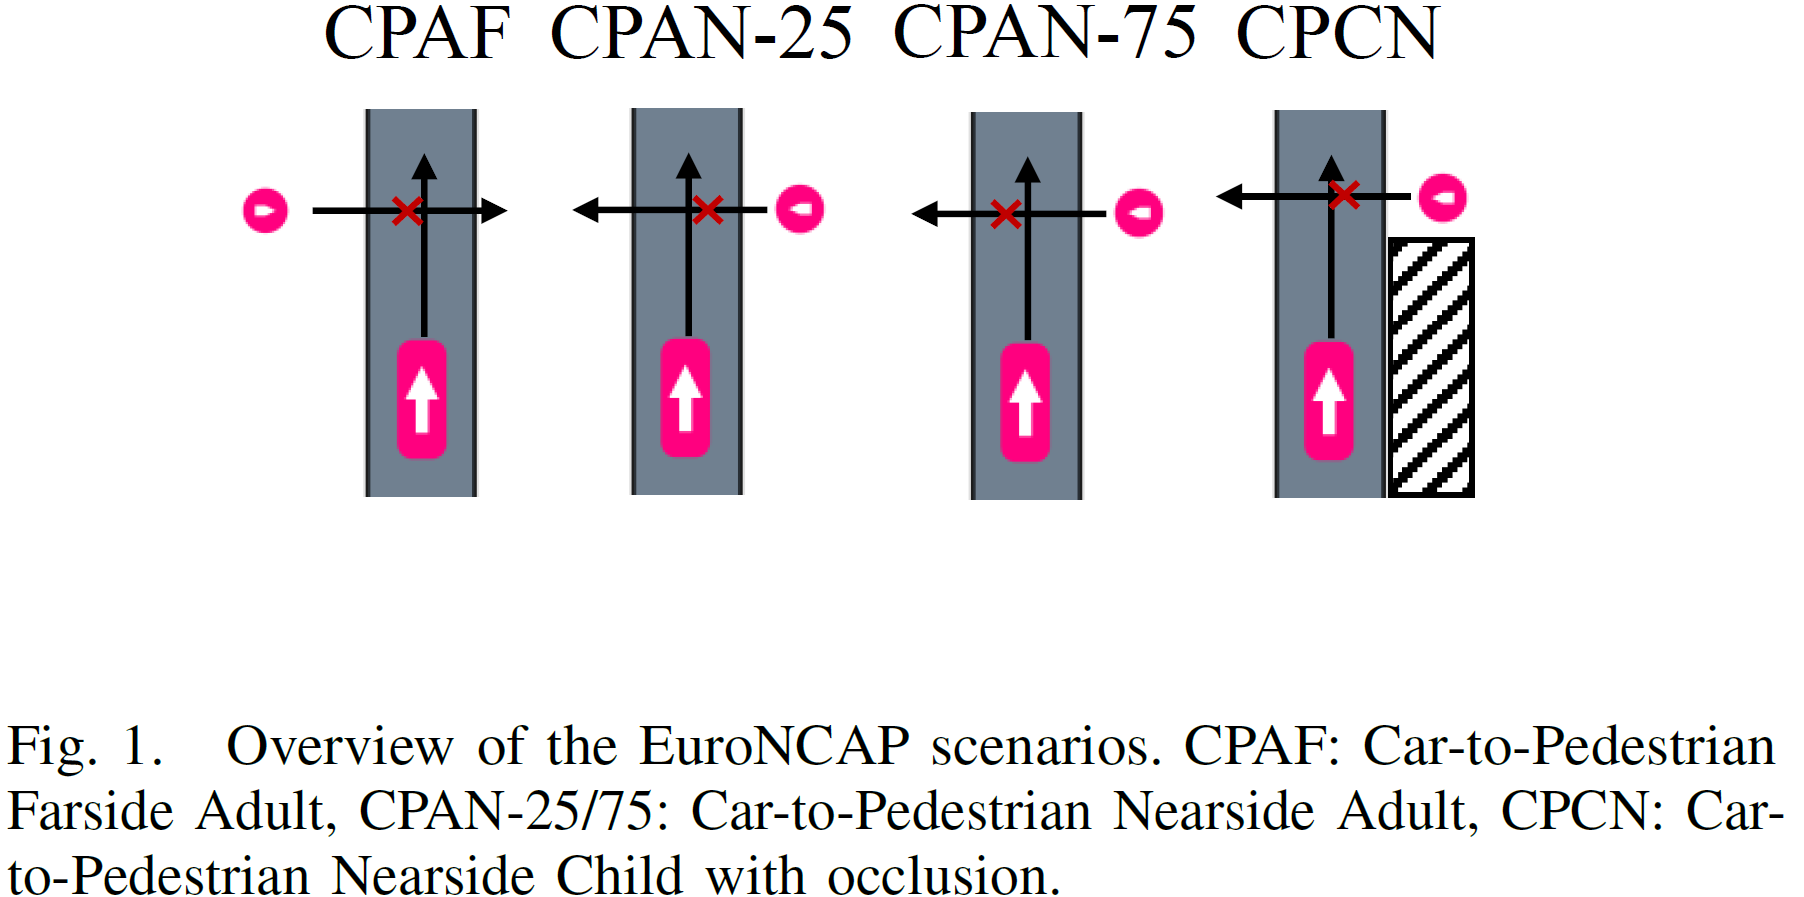 Example of EuroNCAP scenarios used to evaluate pedestrian collision avoidance systems. Source: (Schratter et al. 2019).